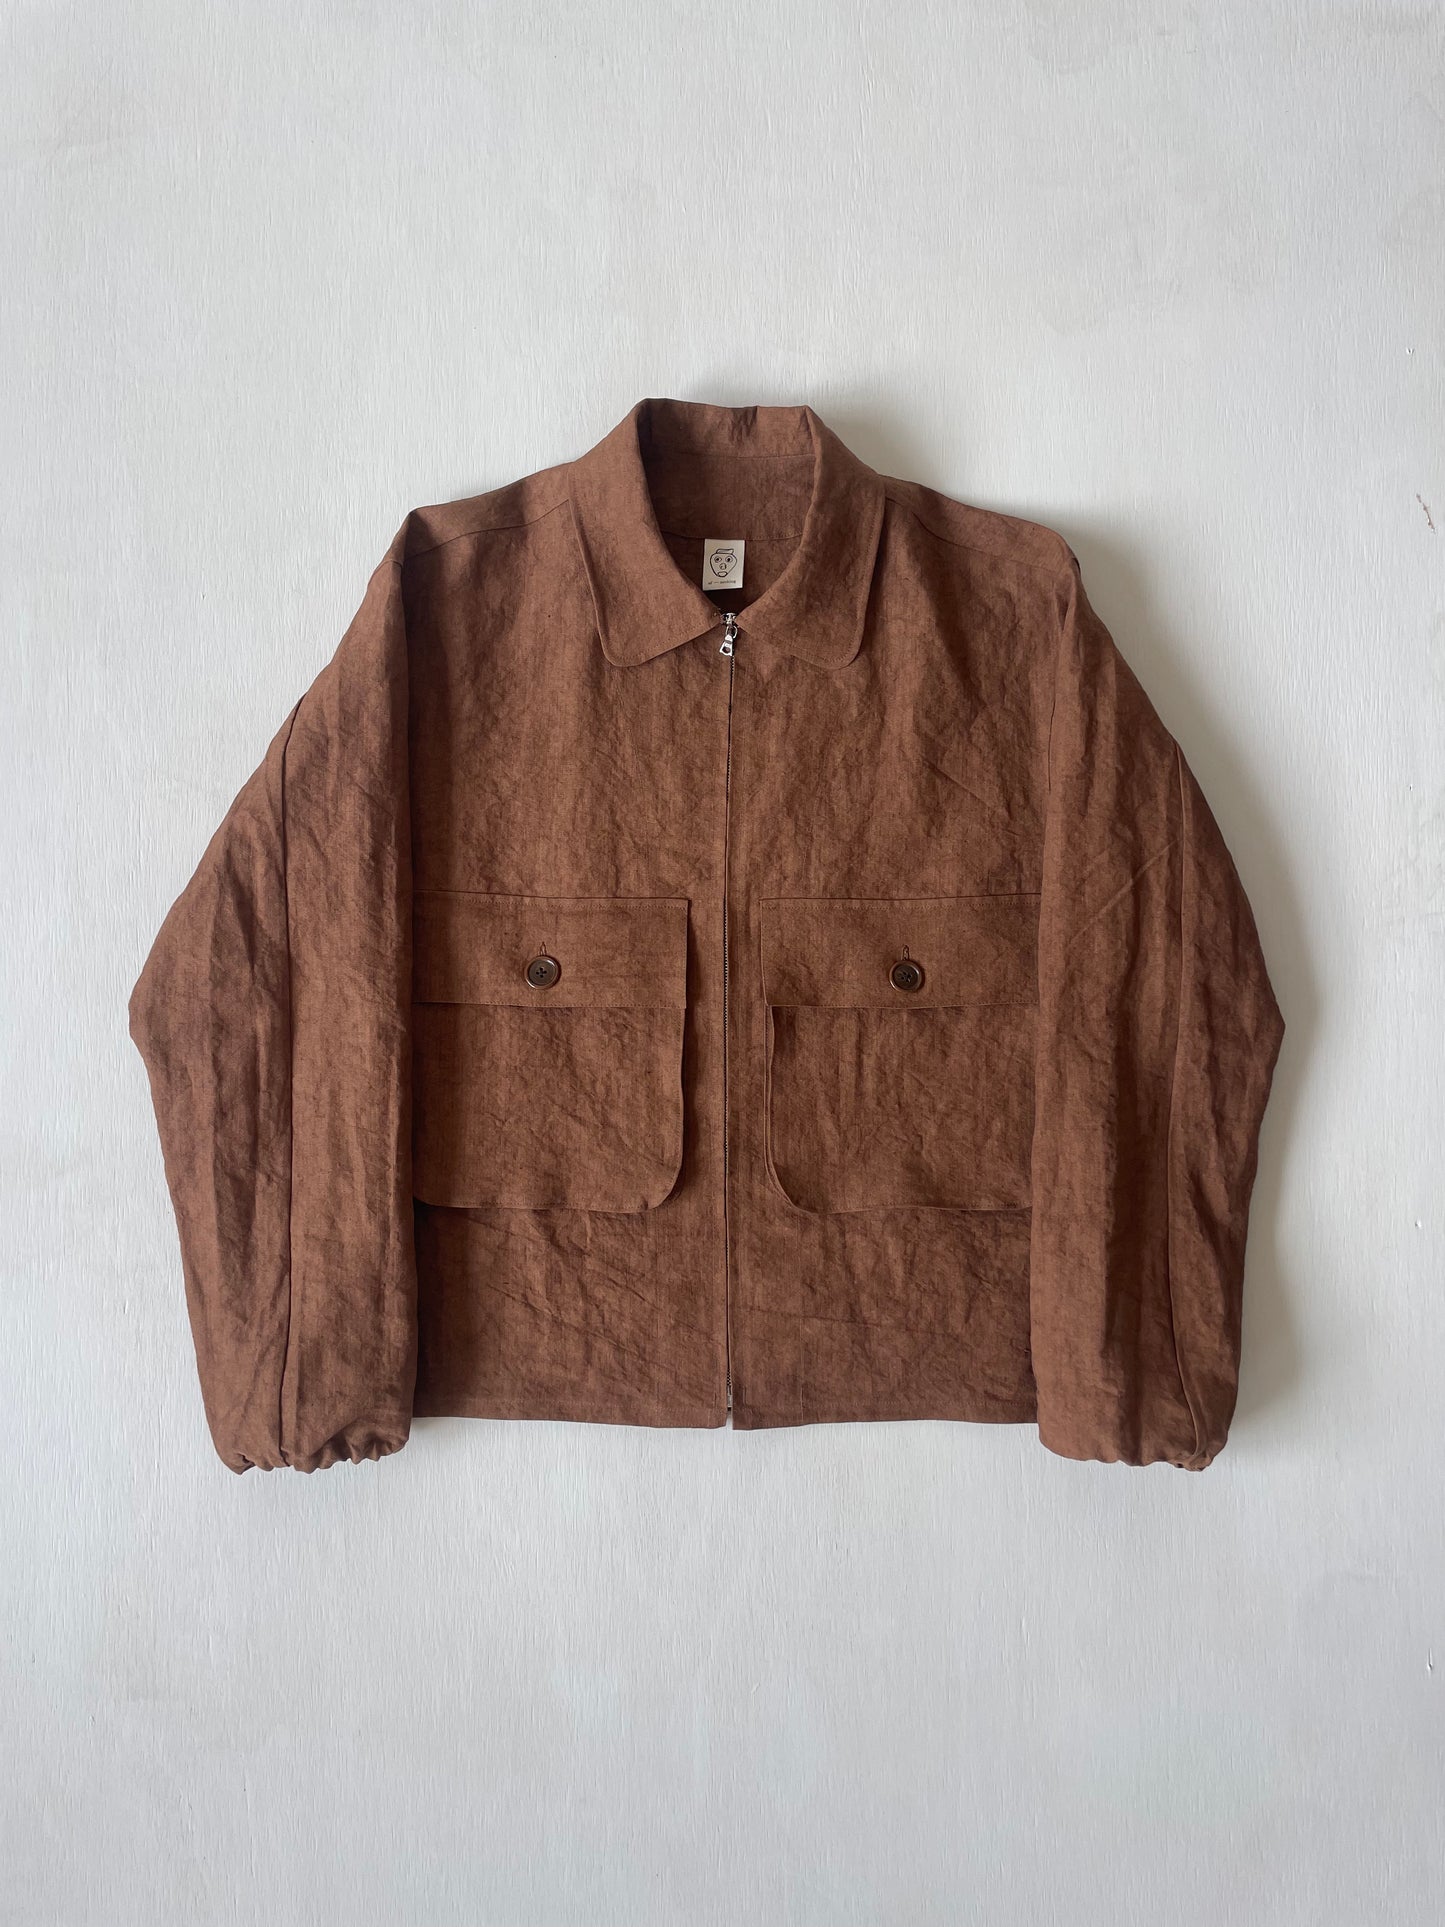 Fishing Jacket in Persimmon Dyed Paper/Linen